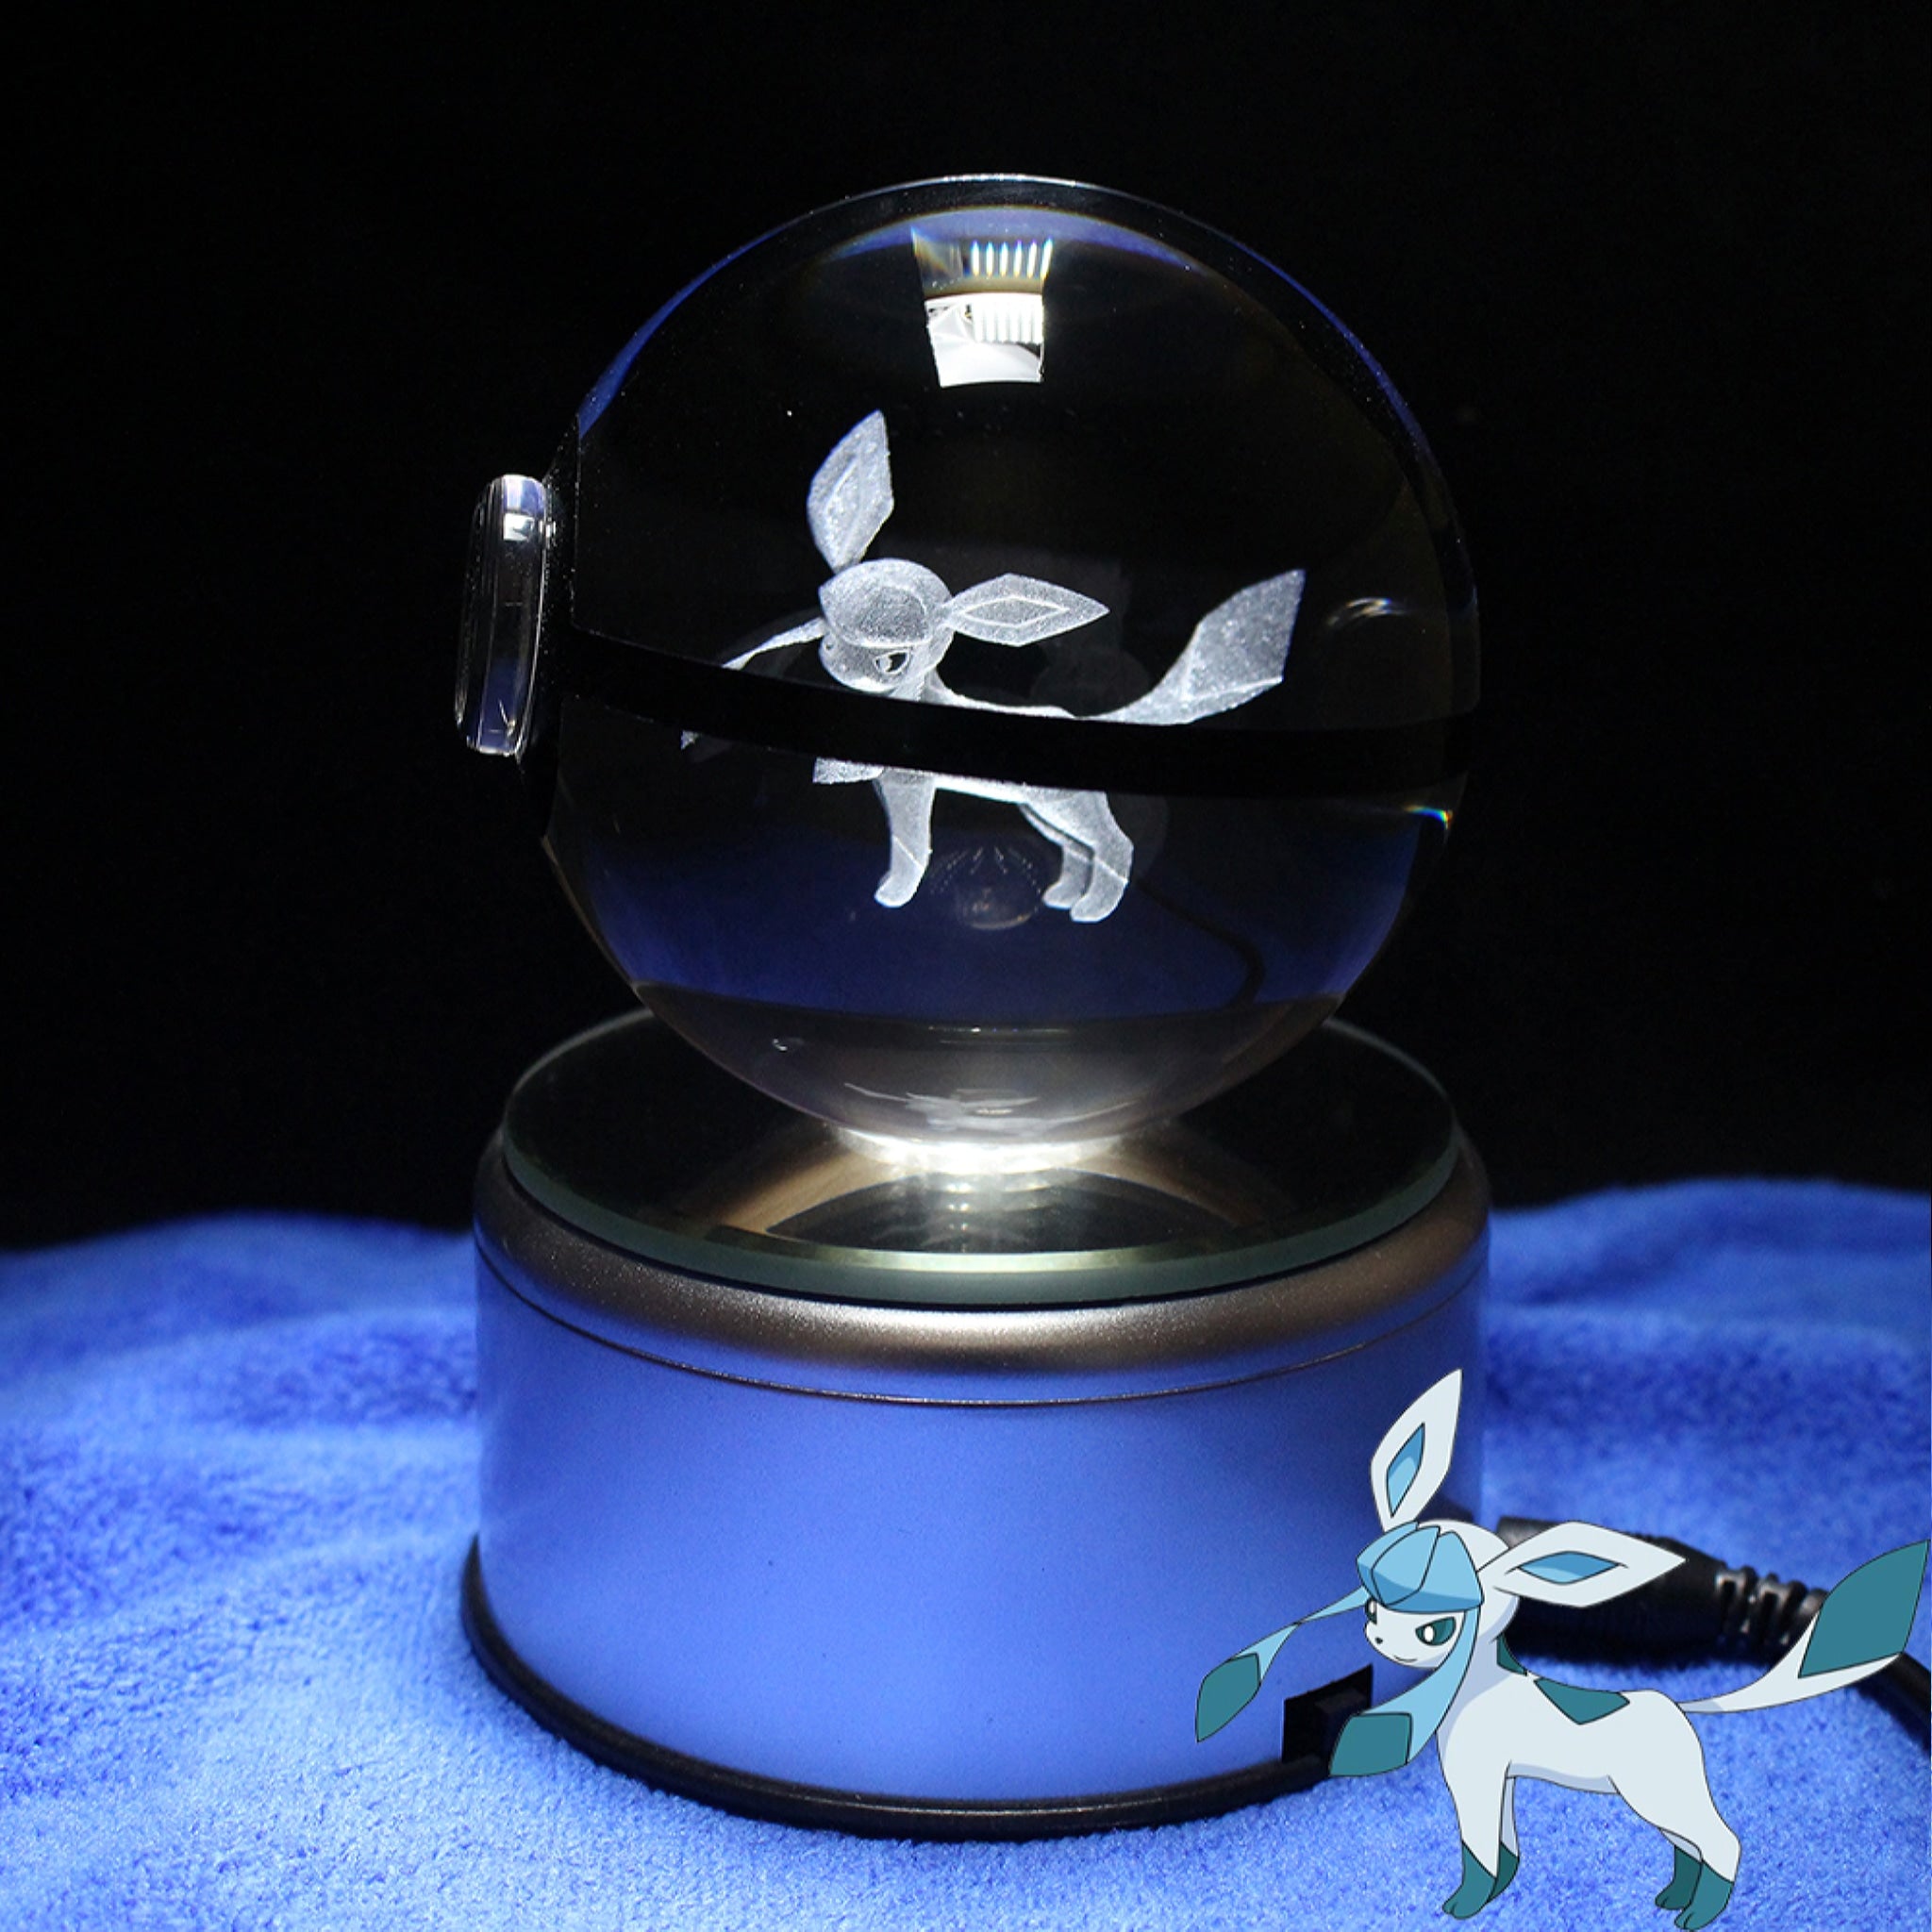 Glaceon Pokemon Glass Crystal Pokeball 24 with Light-Up LED Base Ornament 80mm XL Size